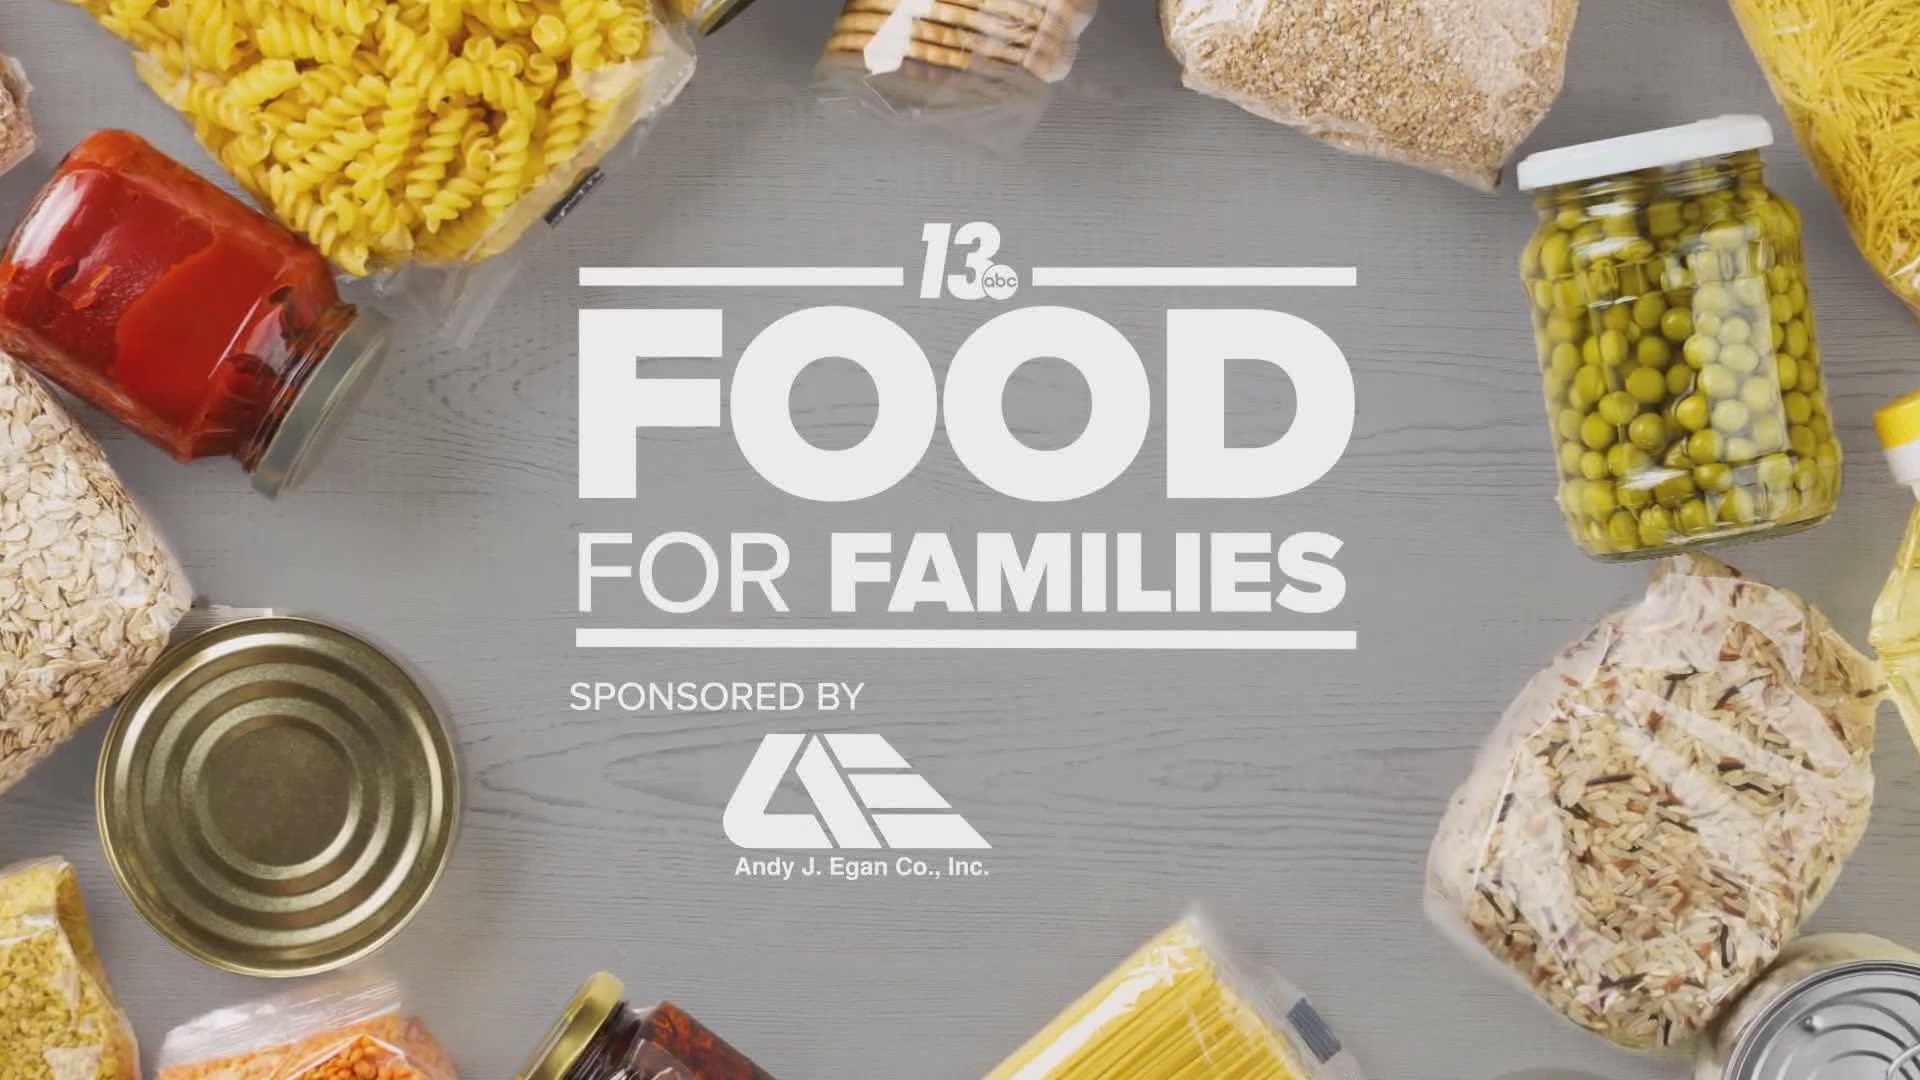 The Andy J. Egan Company joins 13 Food for Families to help feed local families